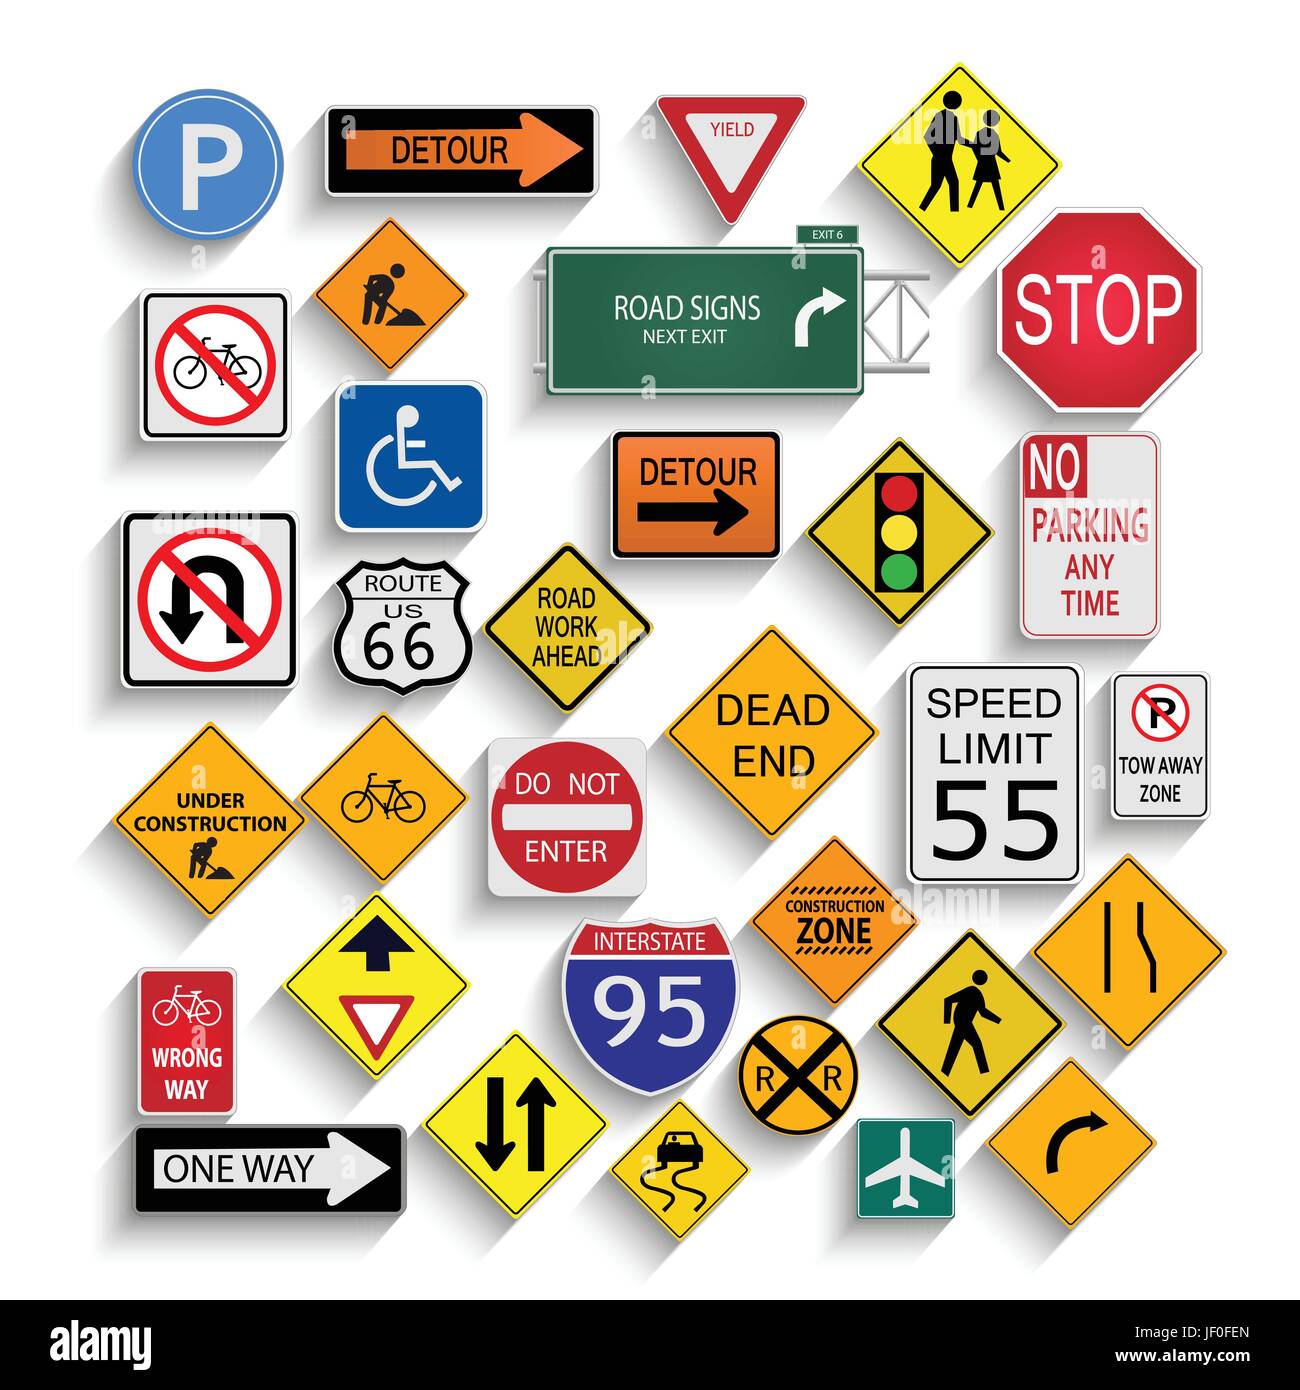 sign, signal, object, travel, isolated, american, traffic, transportation, car, Stock Vector